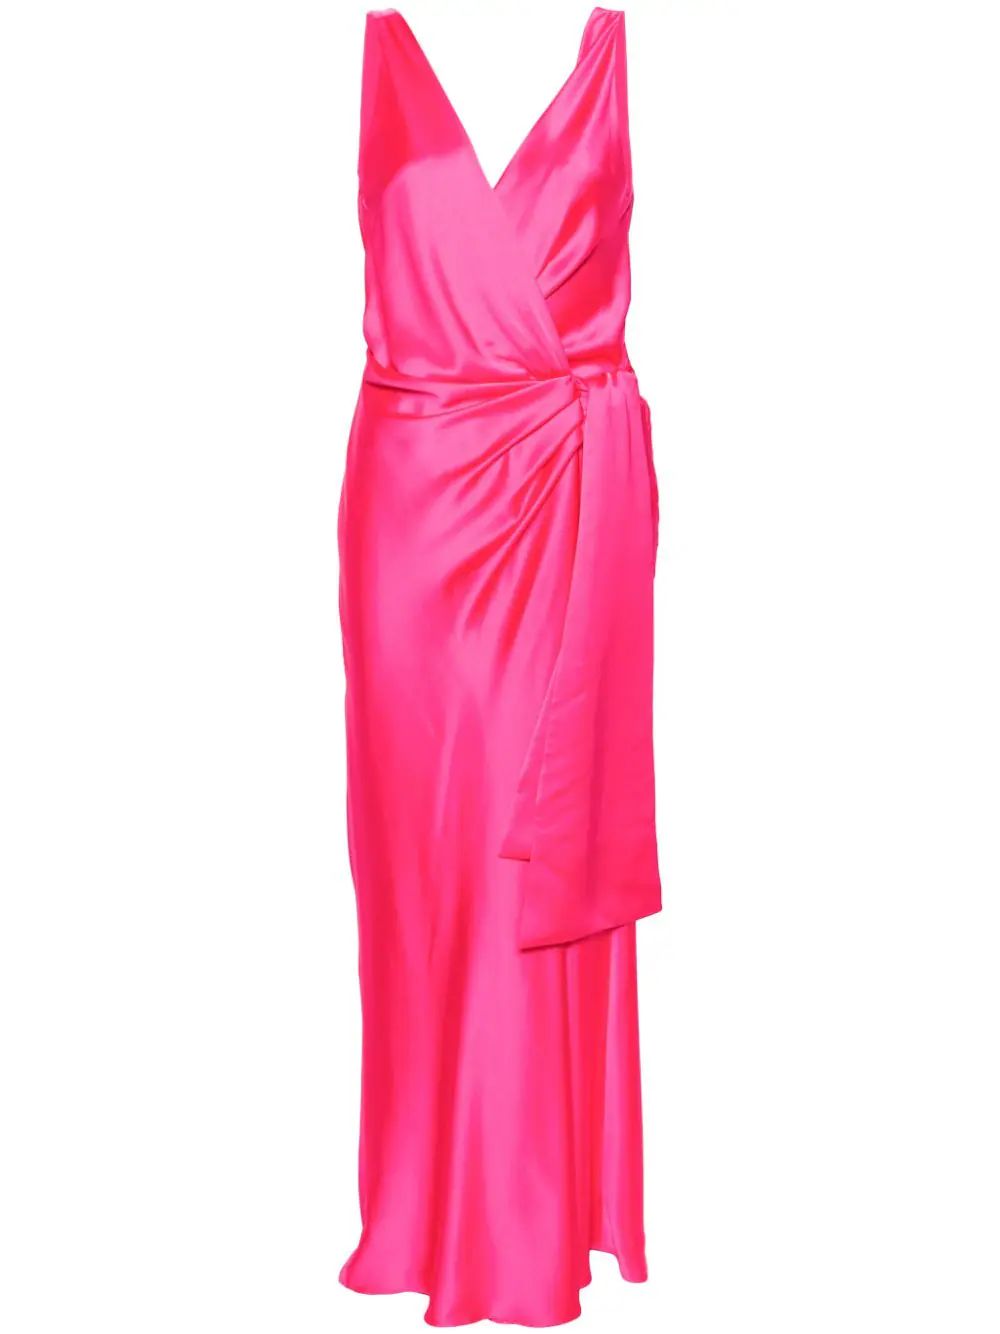 The DetailsPINKOElegant Hammered satin gownMade in ItalyHighlightsfuchsia pink satin finish wrap ... | Farfetch Global